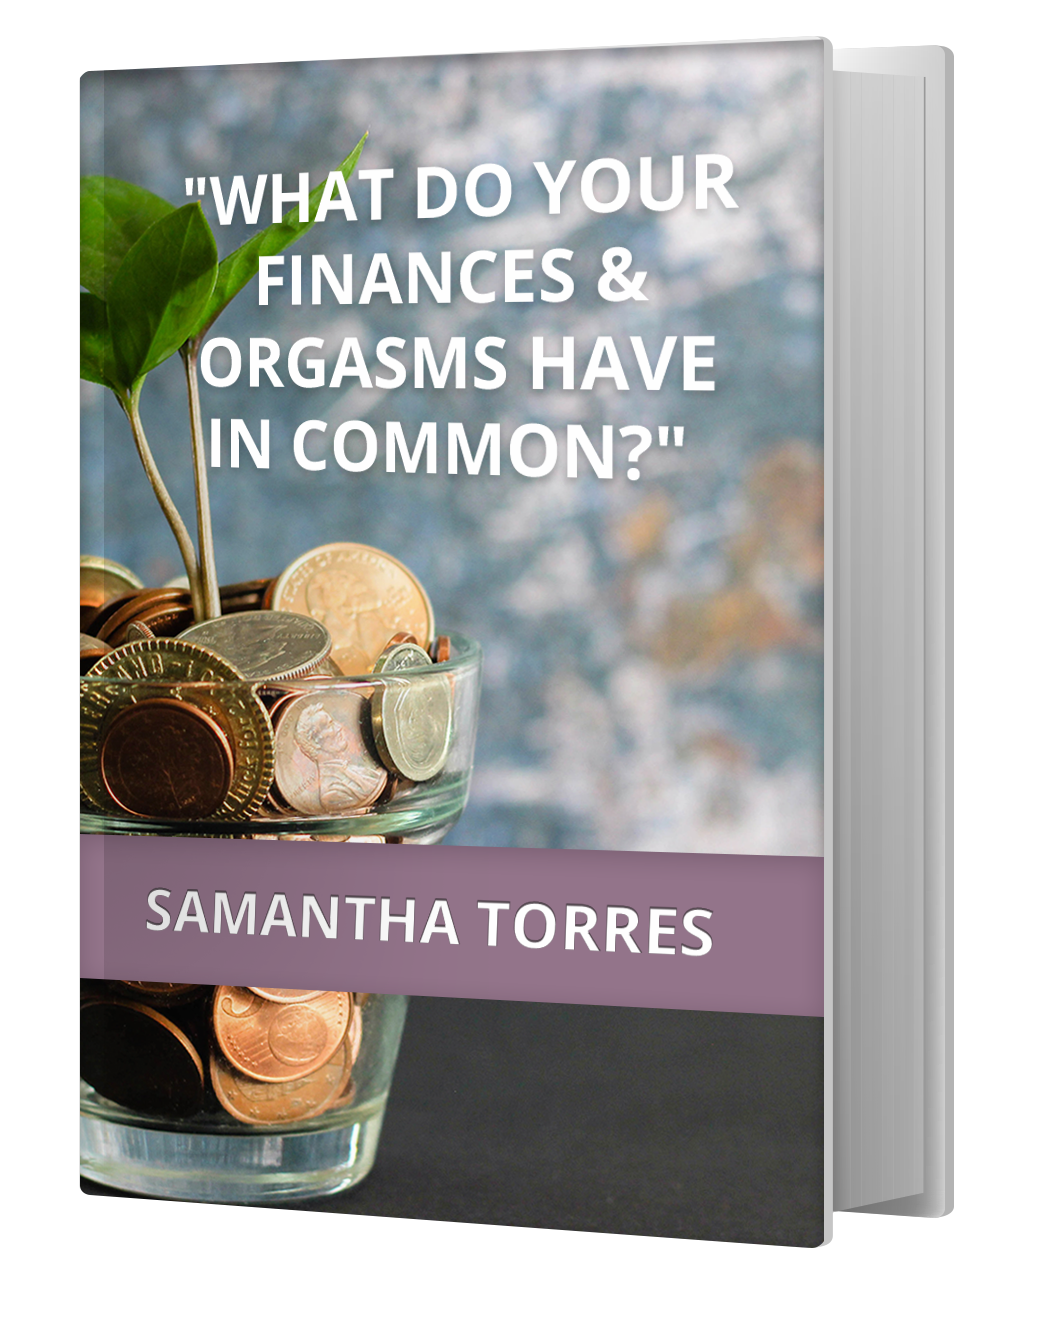 iamge for what do your finances & orgasms have in common?